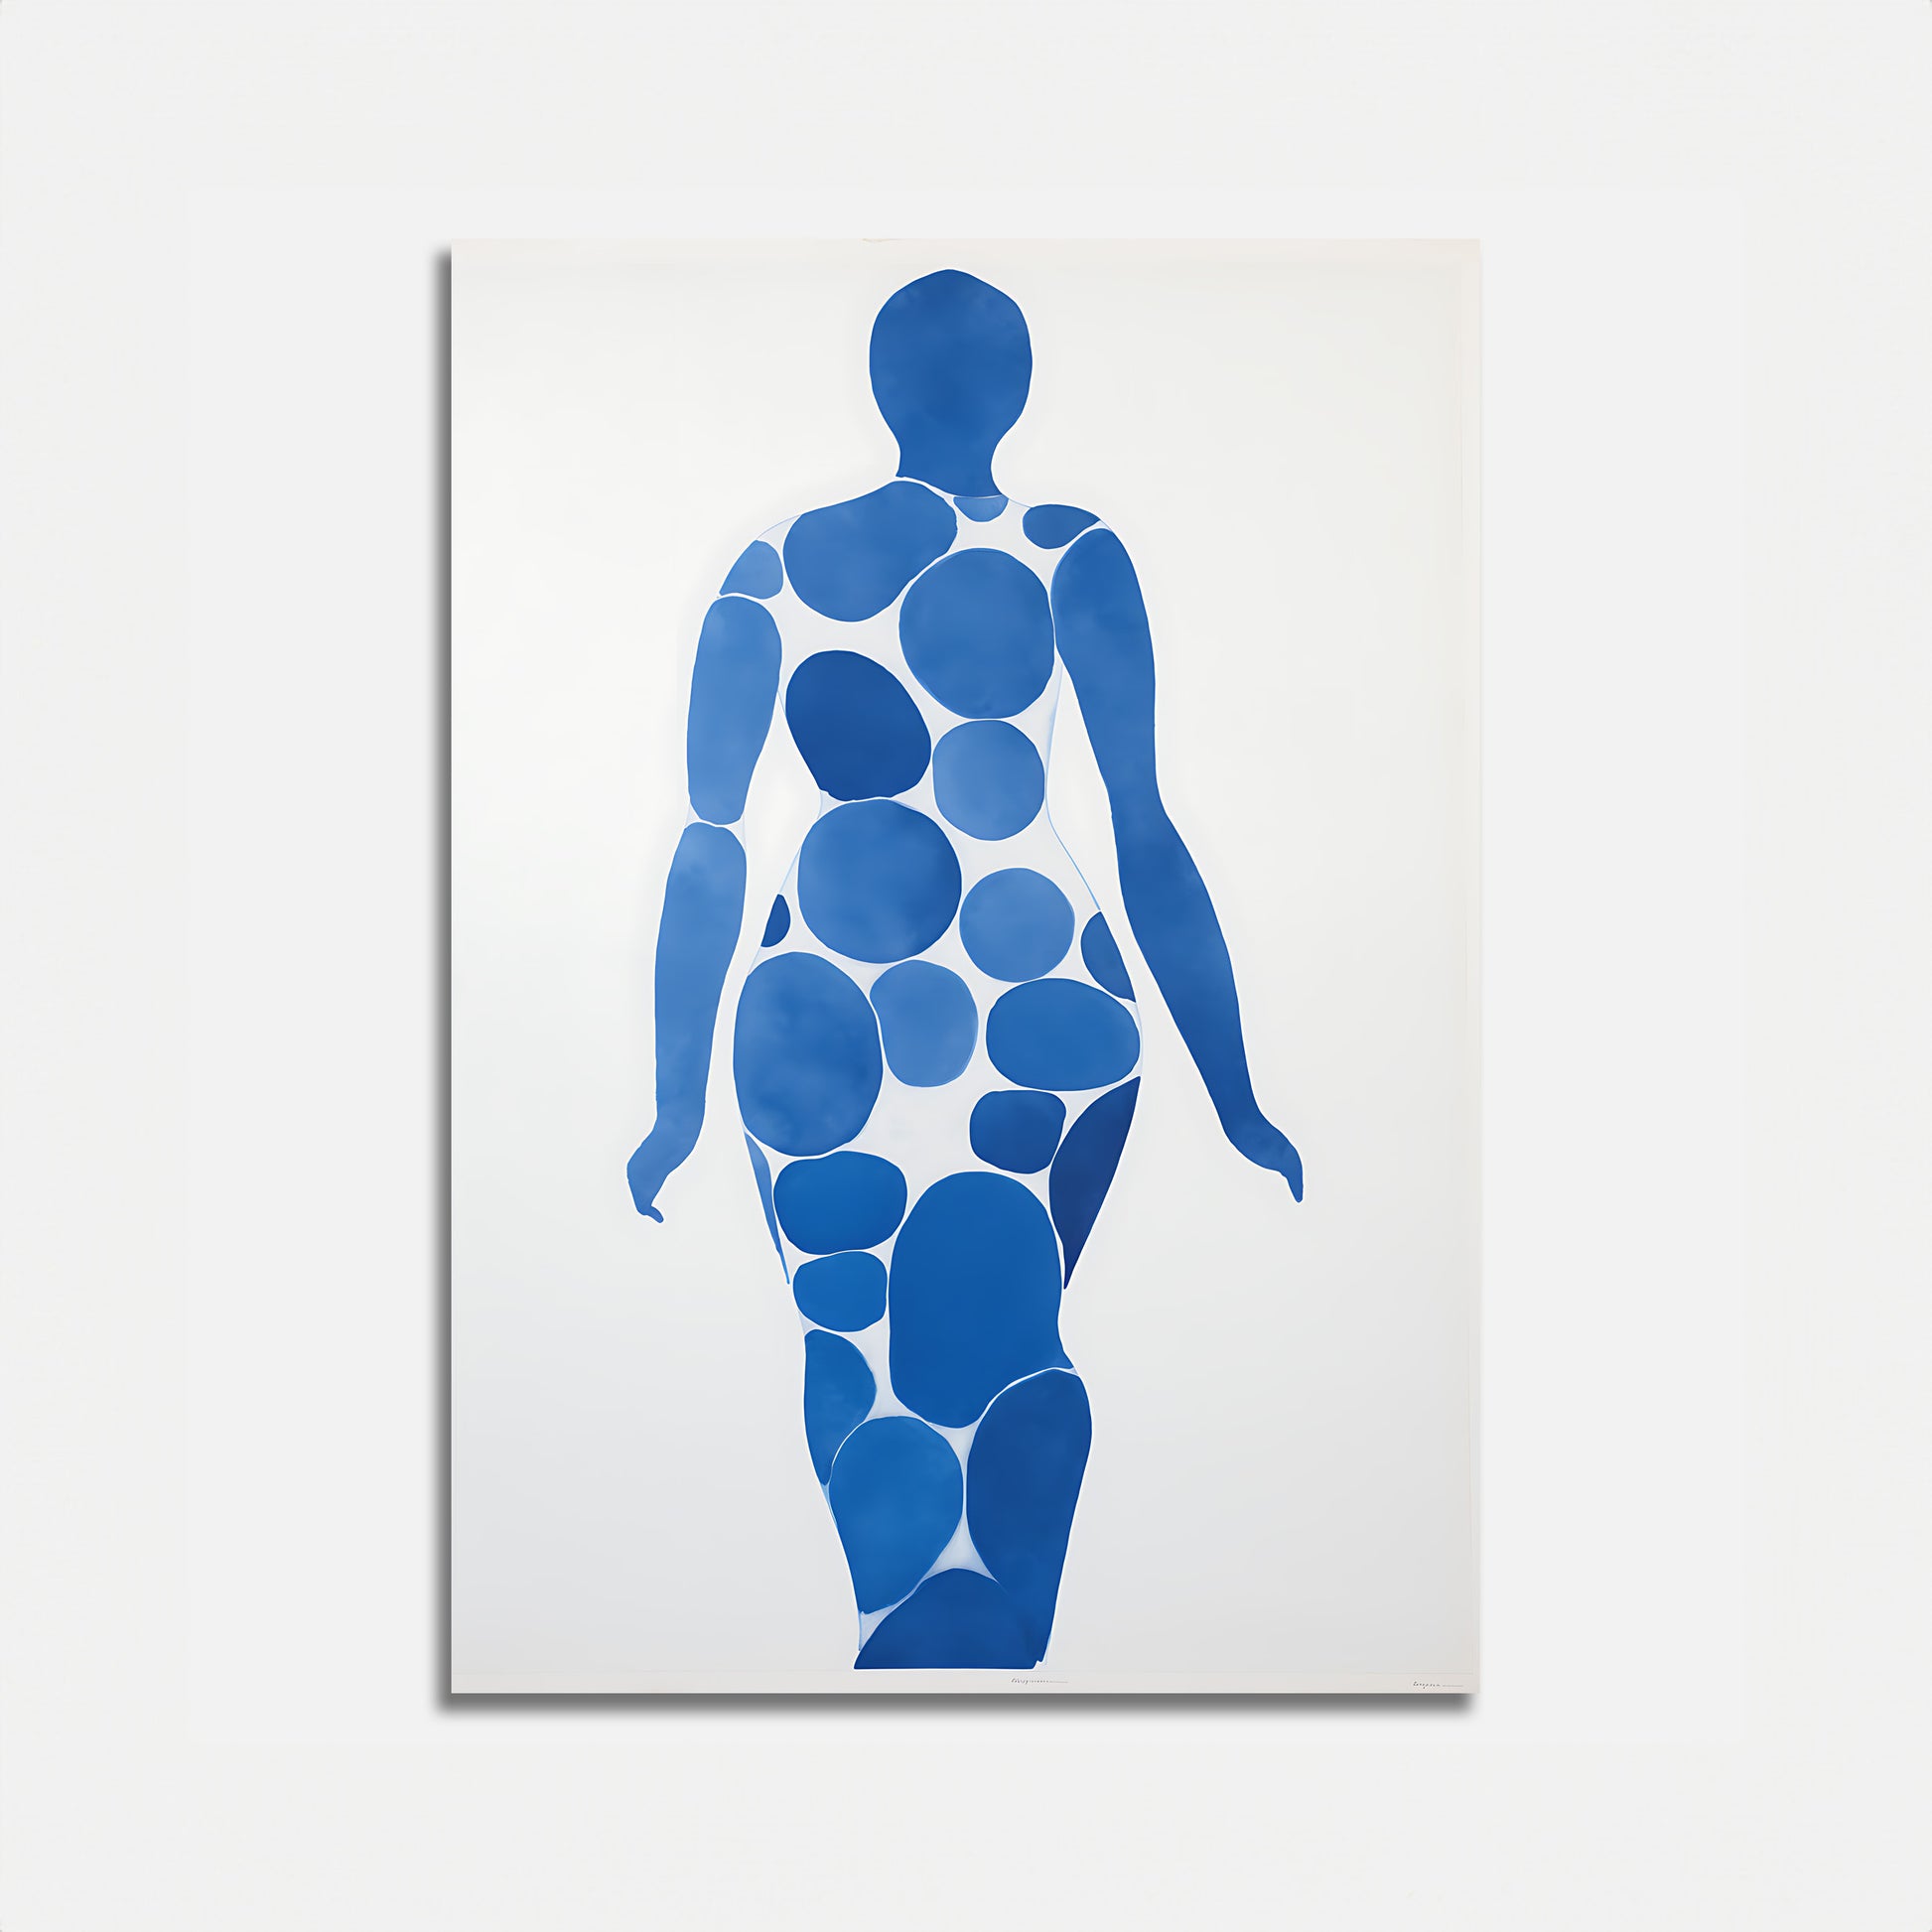 Abstract artwork of a human figure composed of blue circles on a white background.